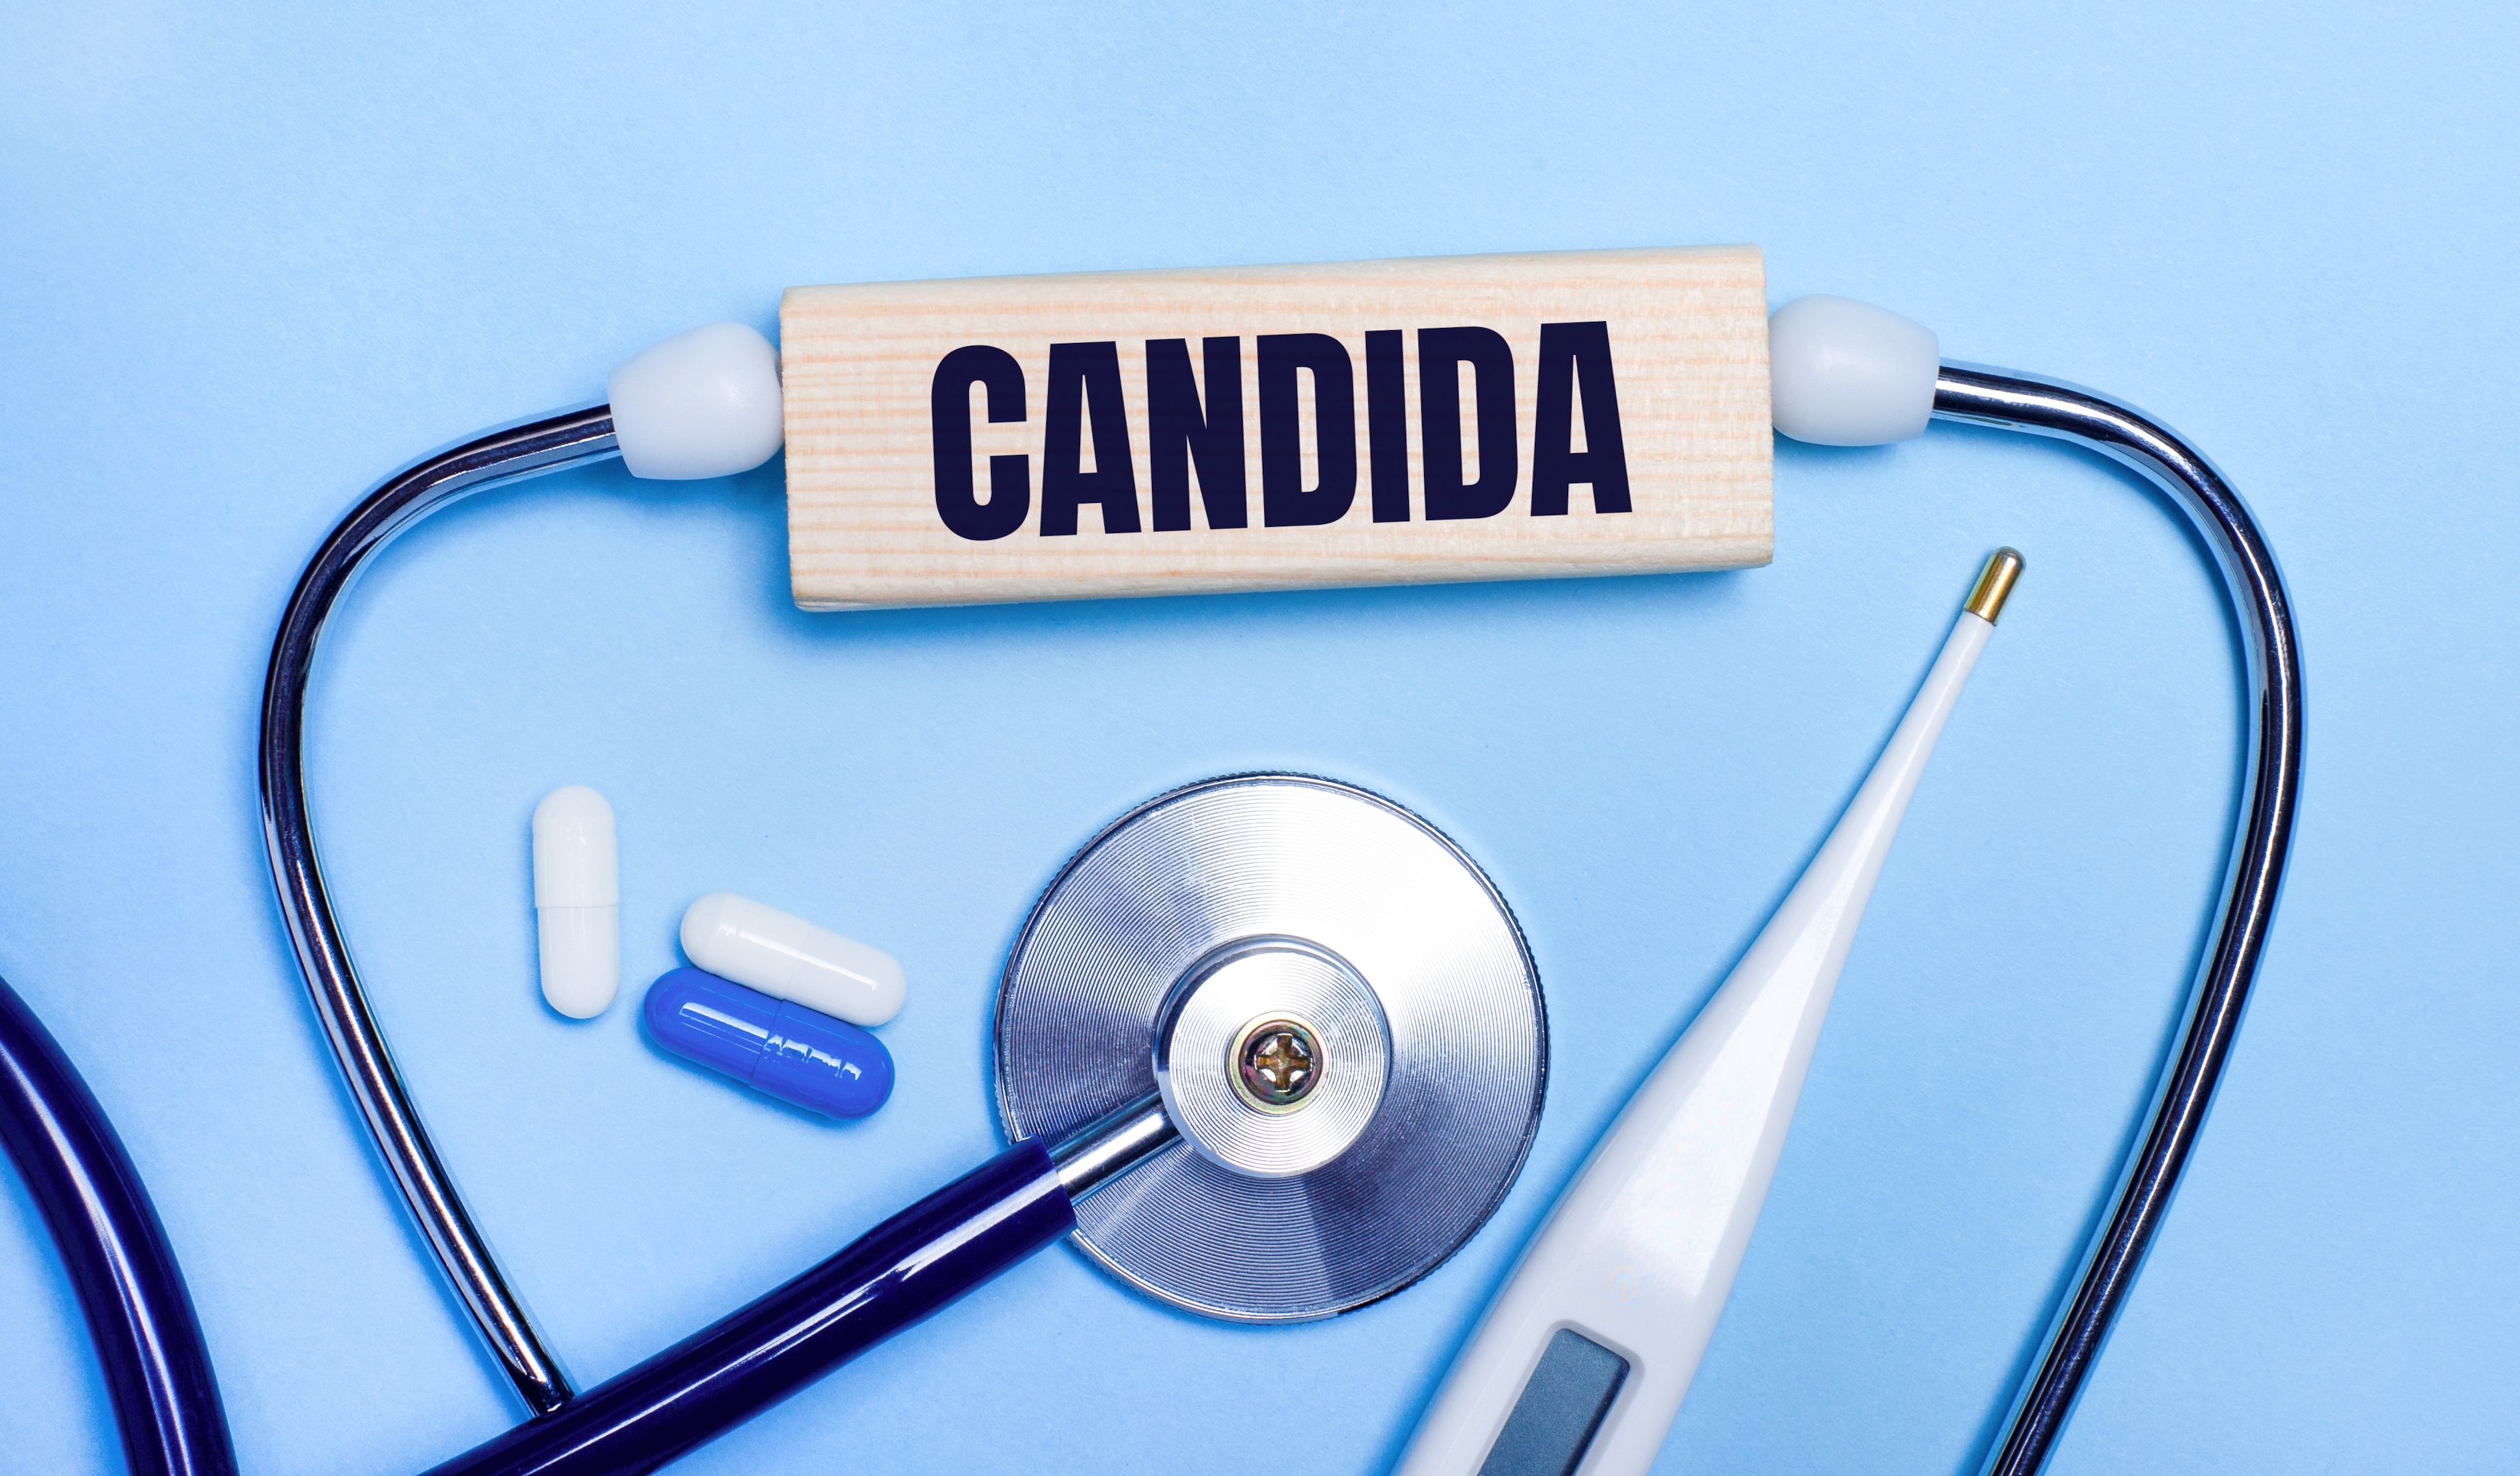 vaginal infections such as candida albicans are common but there are ways to treat yeast infections